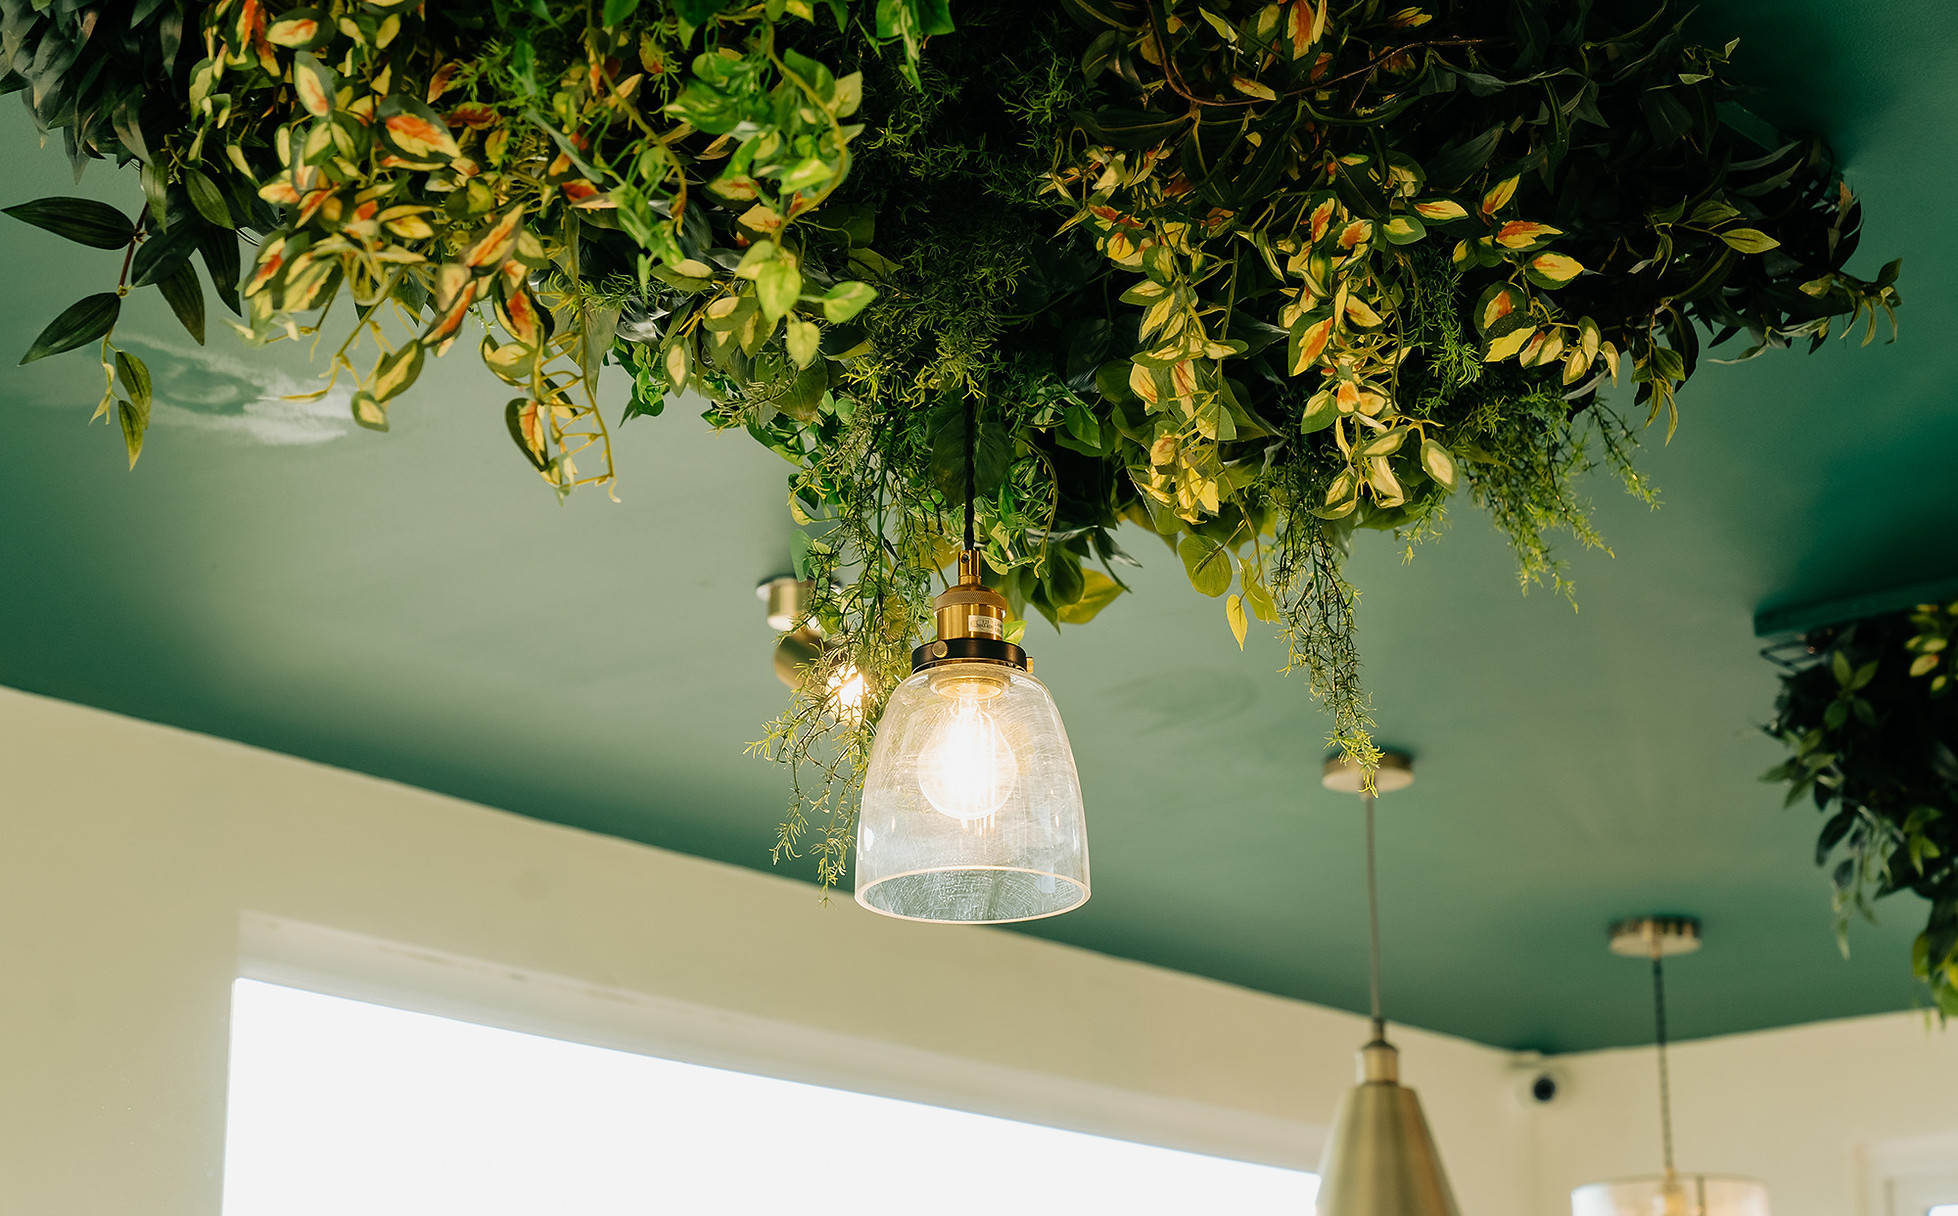 Light fixture with plants above